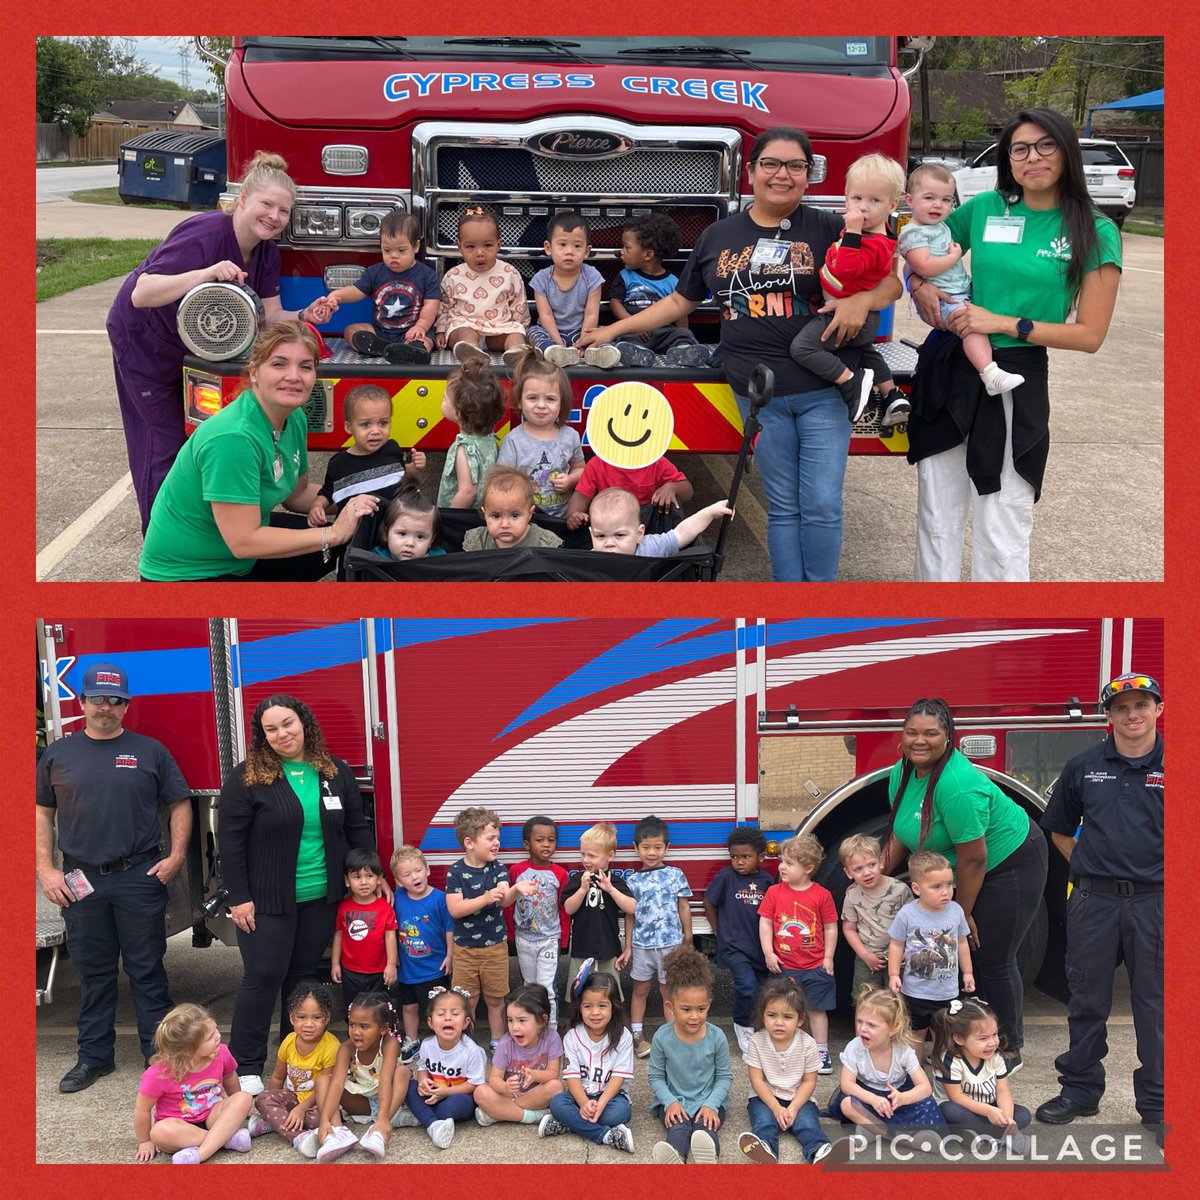 A big THANK YOU to the Cypress Creek Fire Dept. for coming to visit our kiddos during fire safety week!! 🔥🚒🧯 @cypreescreekfd @CFISDELC1 @CFISDELCS #FireSafetyWeek